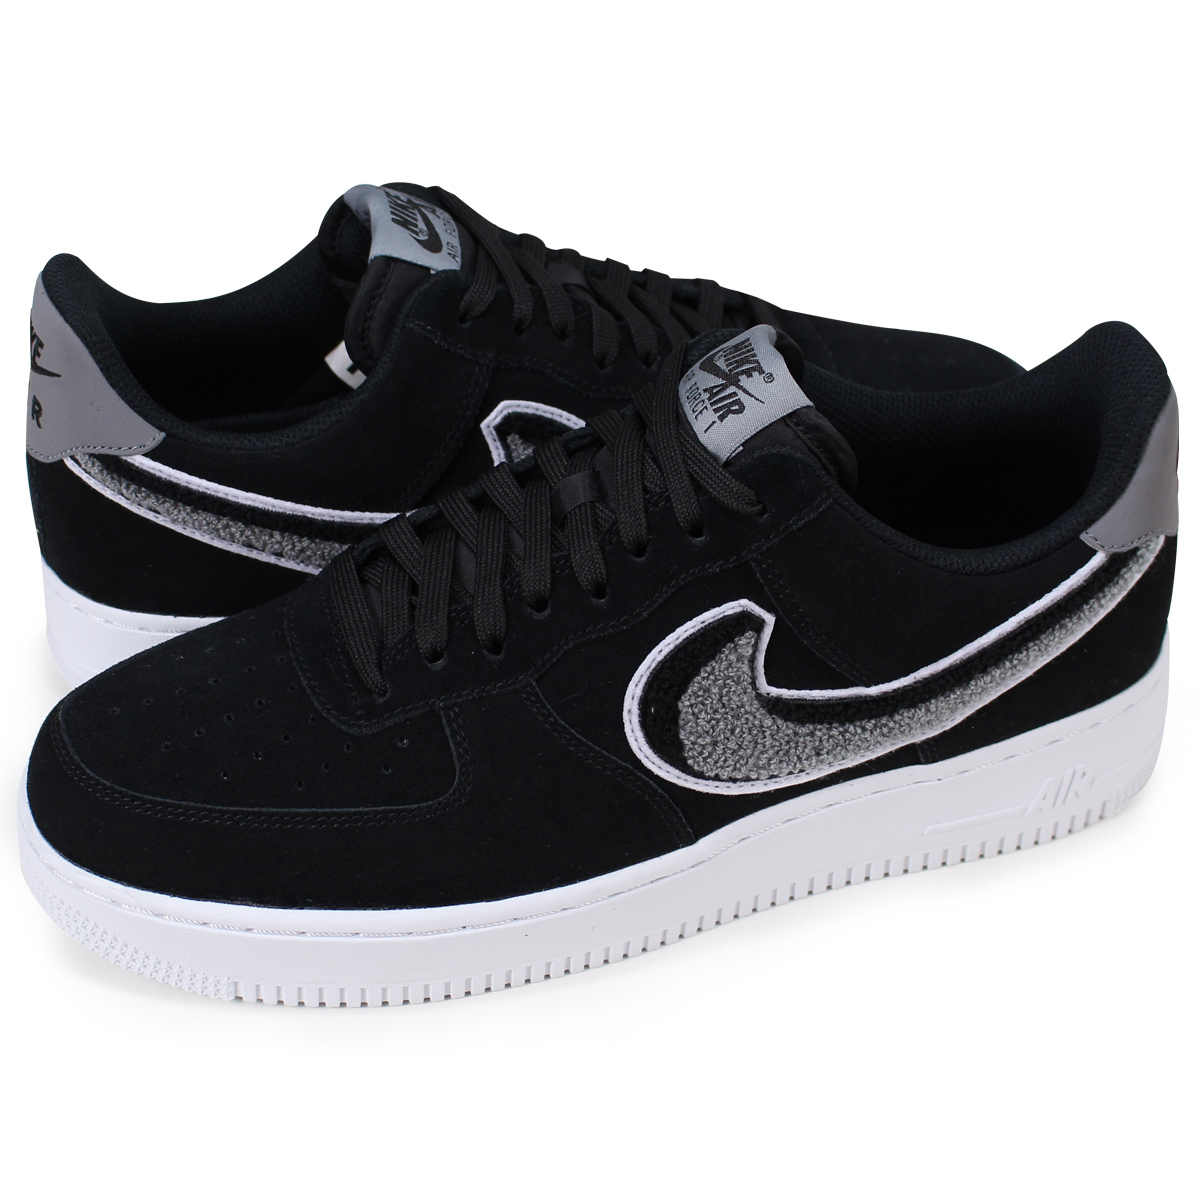 Whats up Sports: NIKE AIR FORCE 1 07 LV8 Nike air force 1 sneakers men 823,511-014 black [load ...